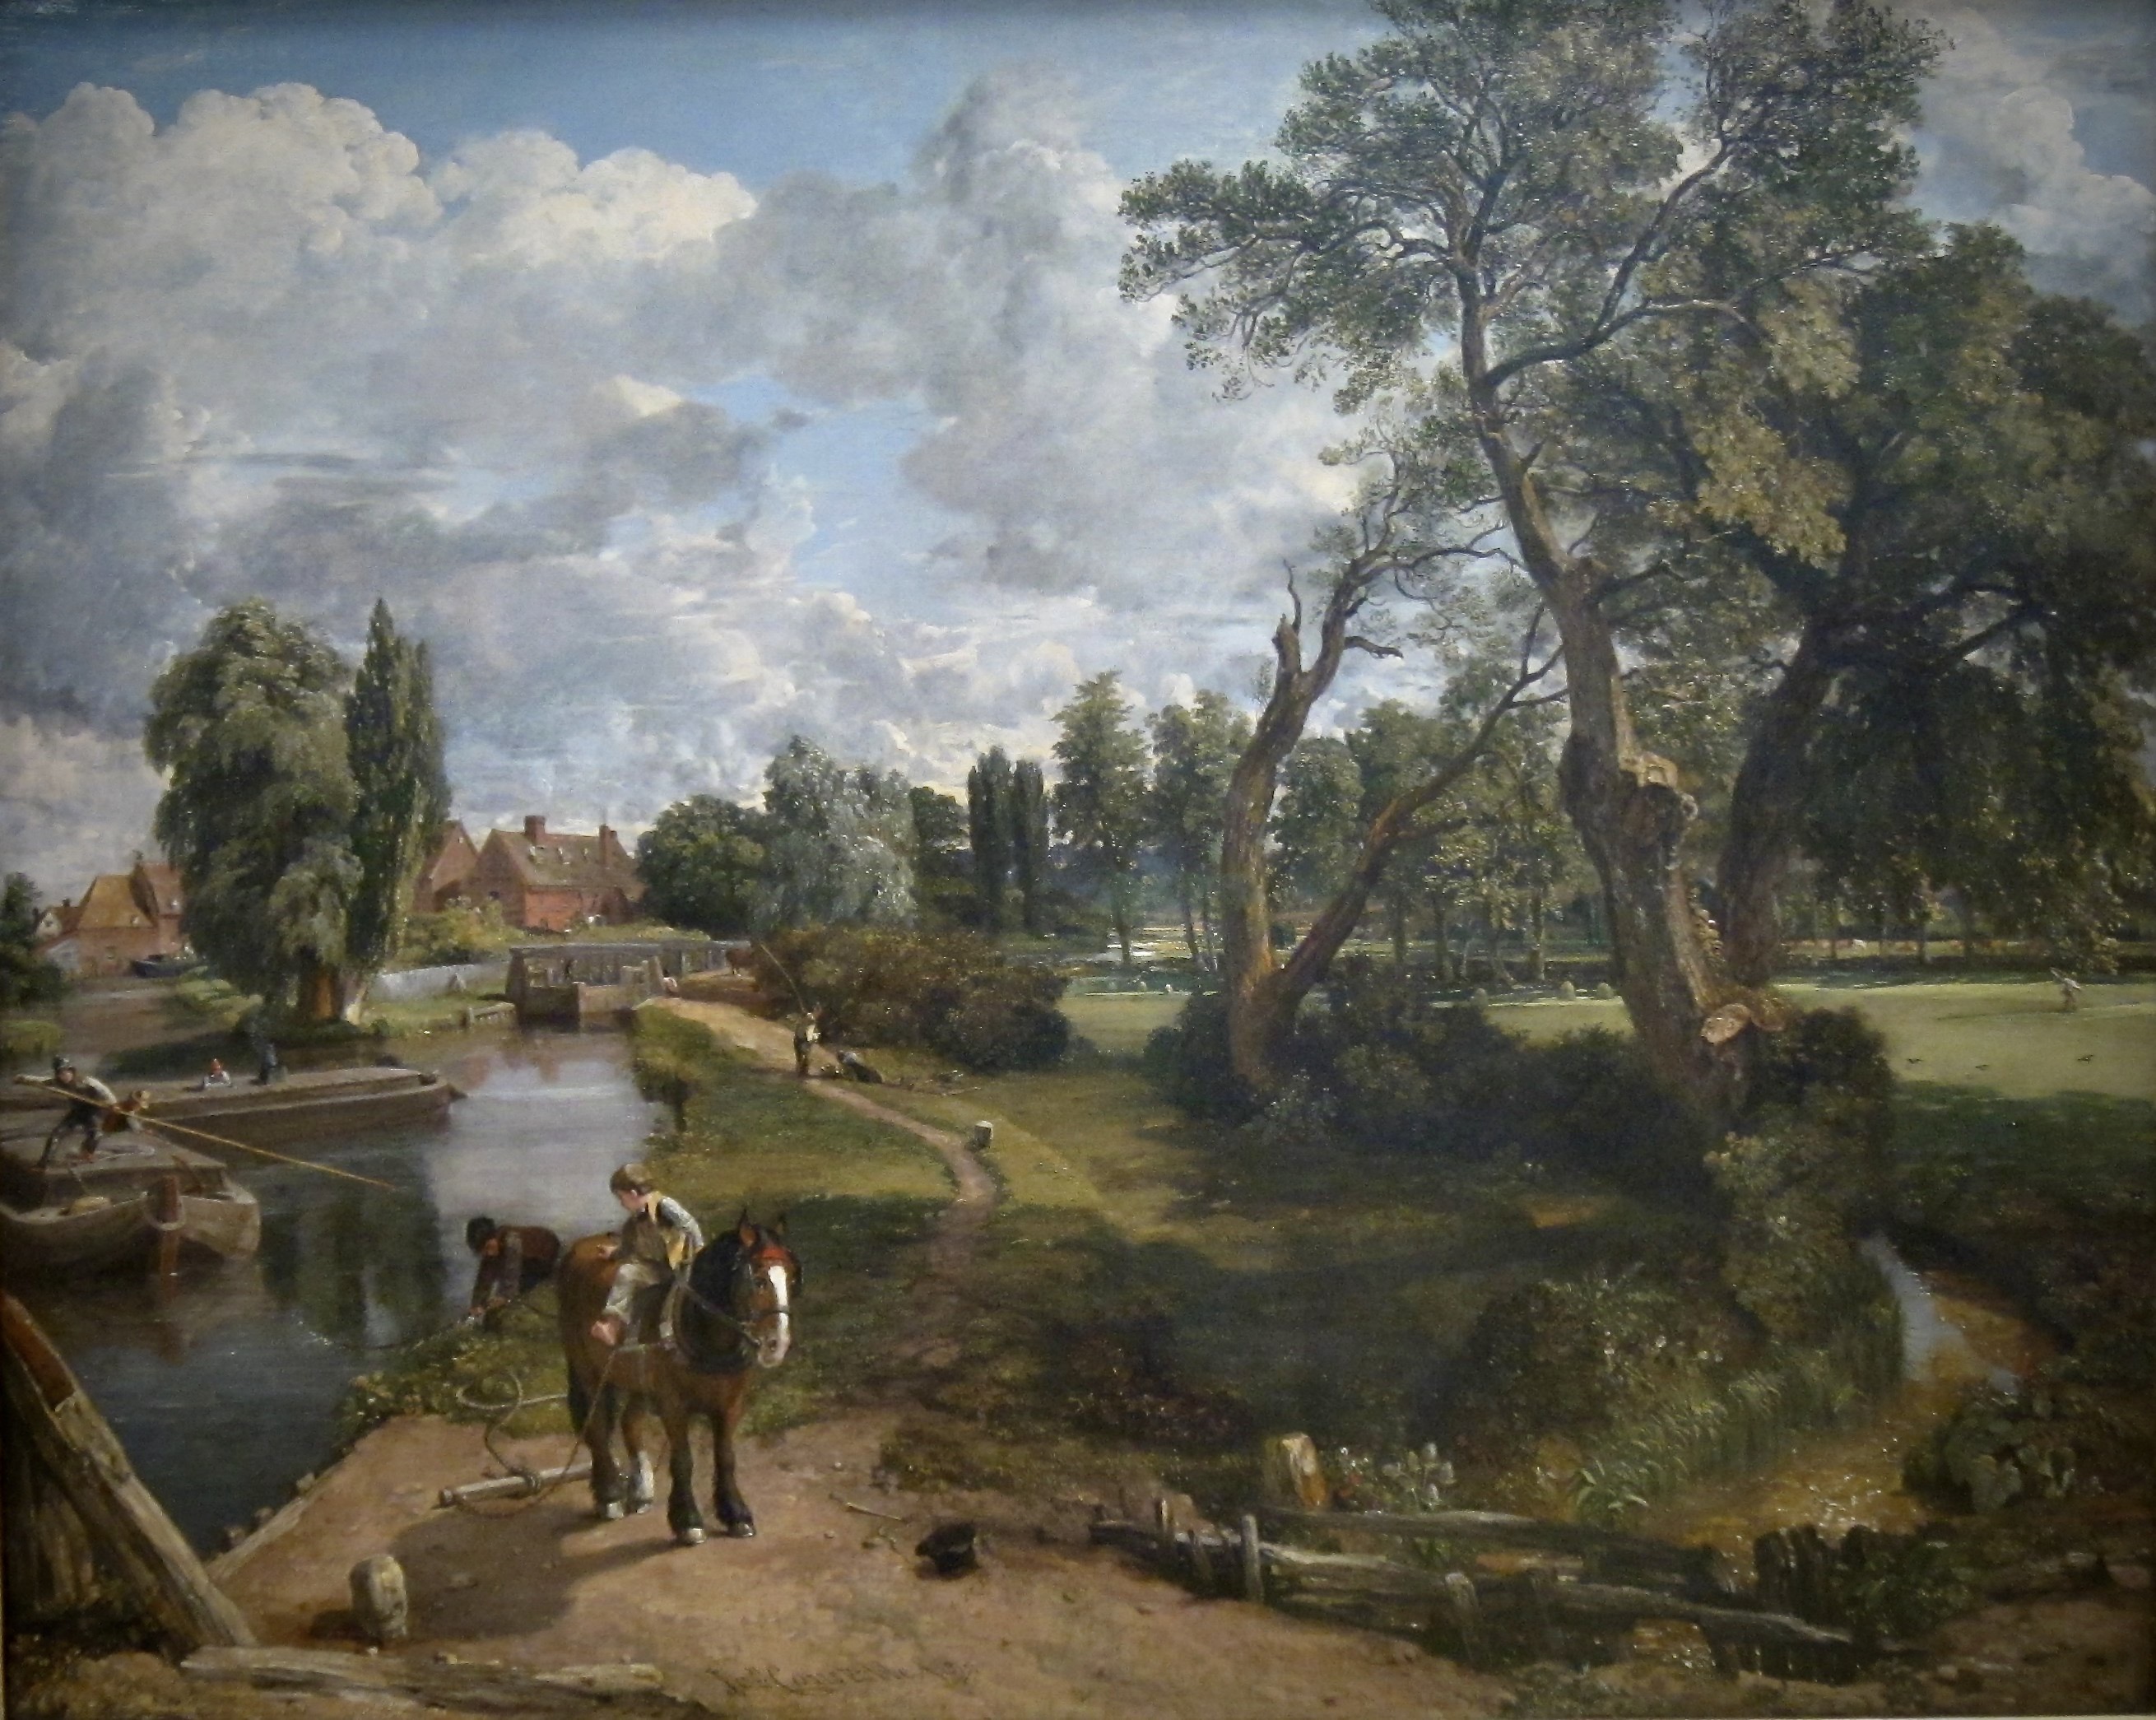 Flatford_Mill_(Scene_on_a_Navigable_River)_by_John_Constable,_Tate_Britain